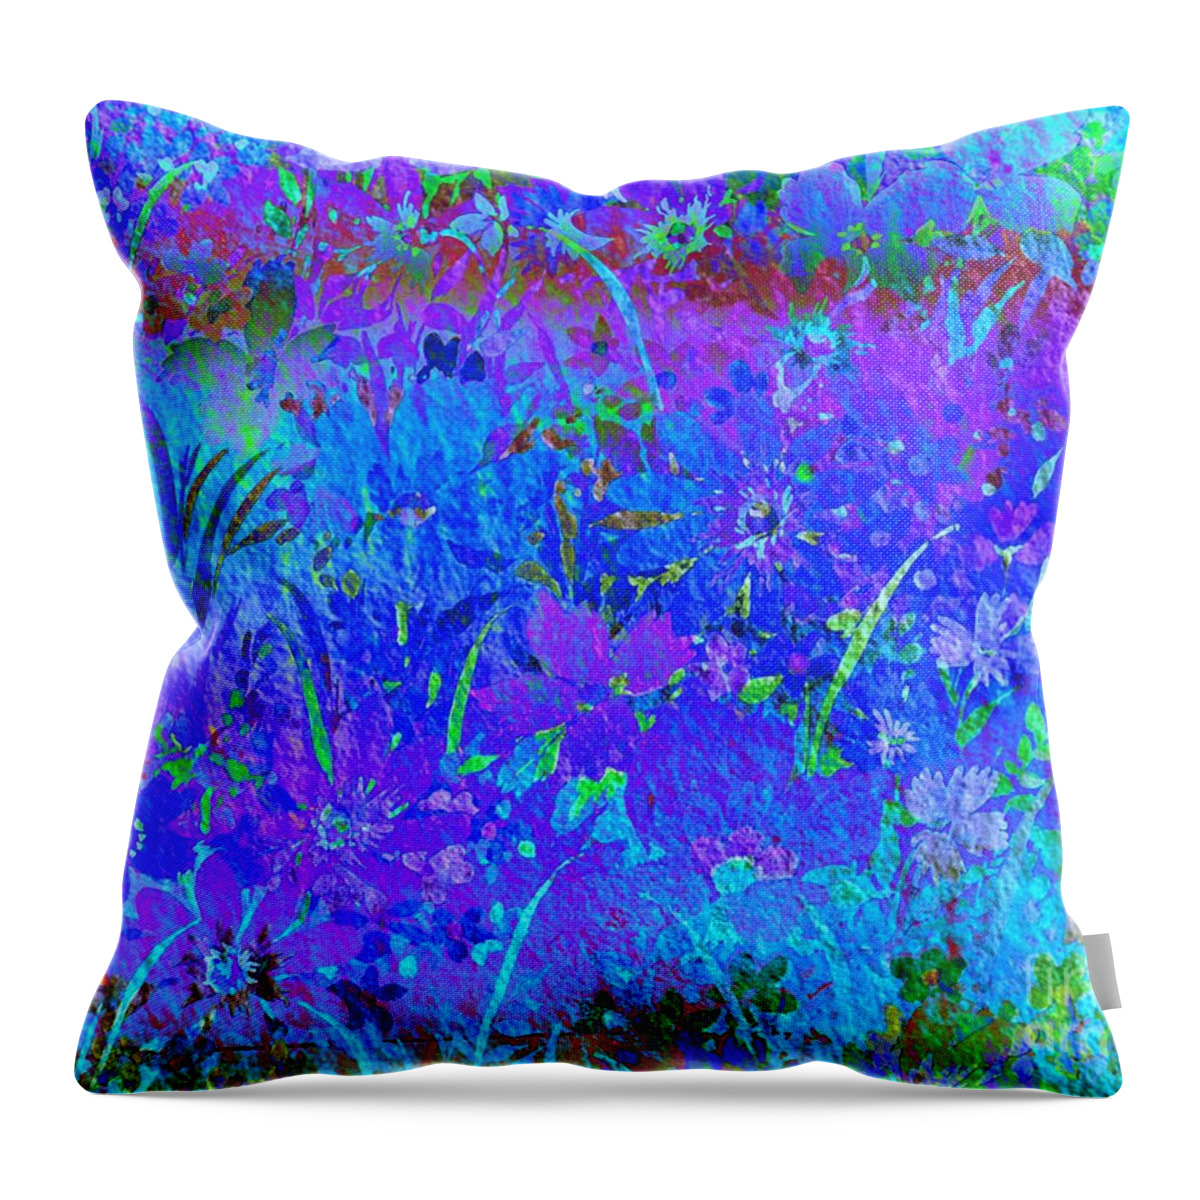 Floral Abstract Throw Pillow featuring the photograph Soft Pastel Floral Abstract by Judy Palkimas